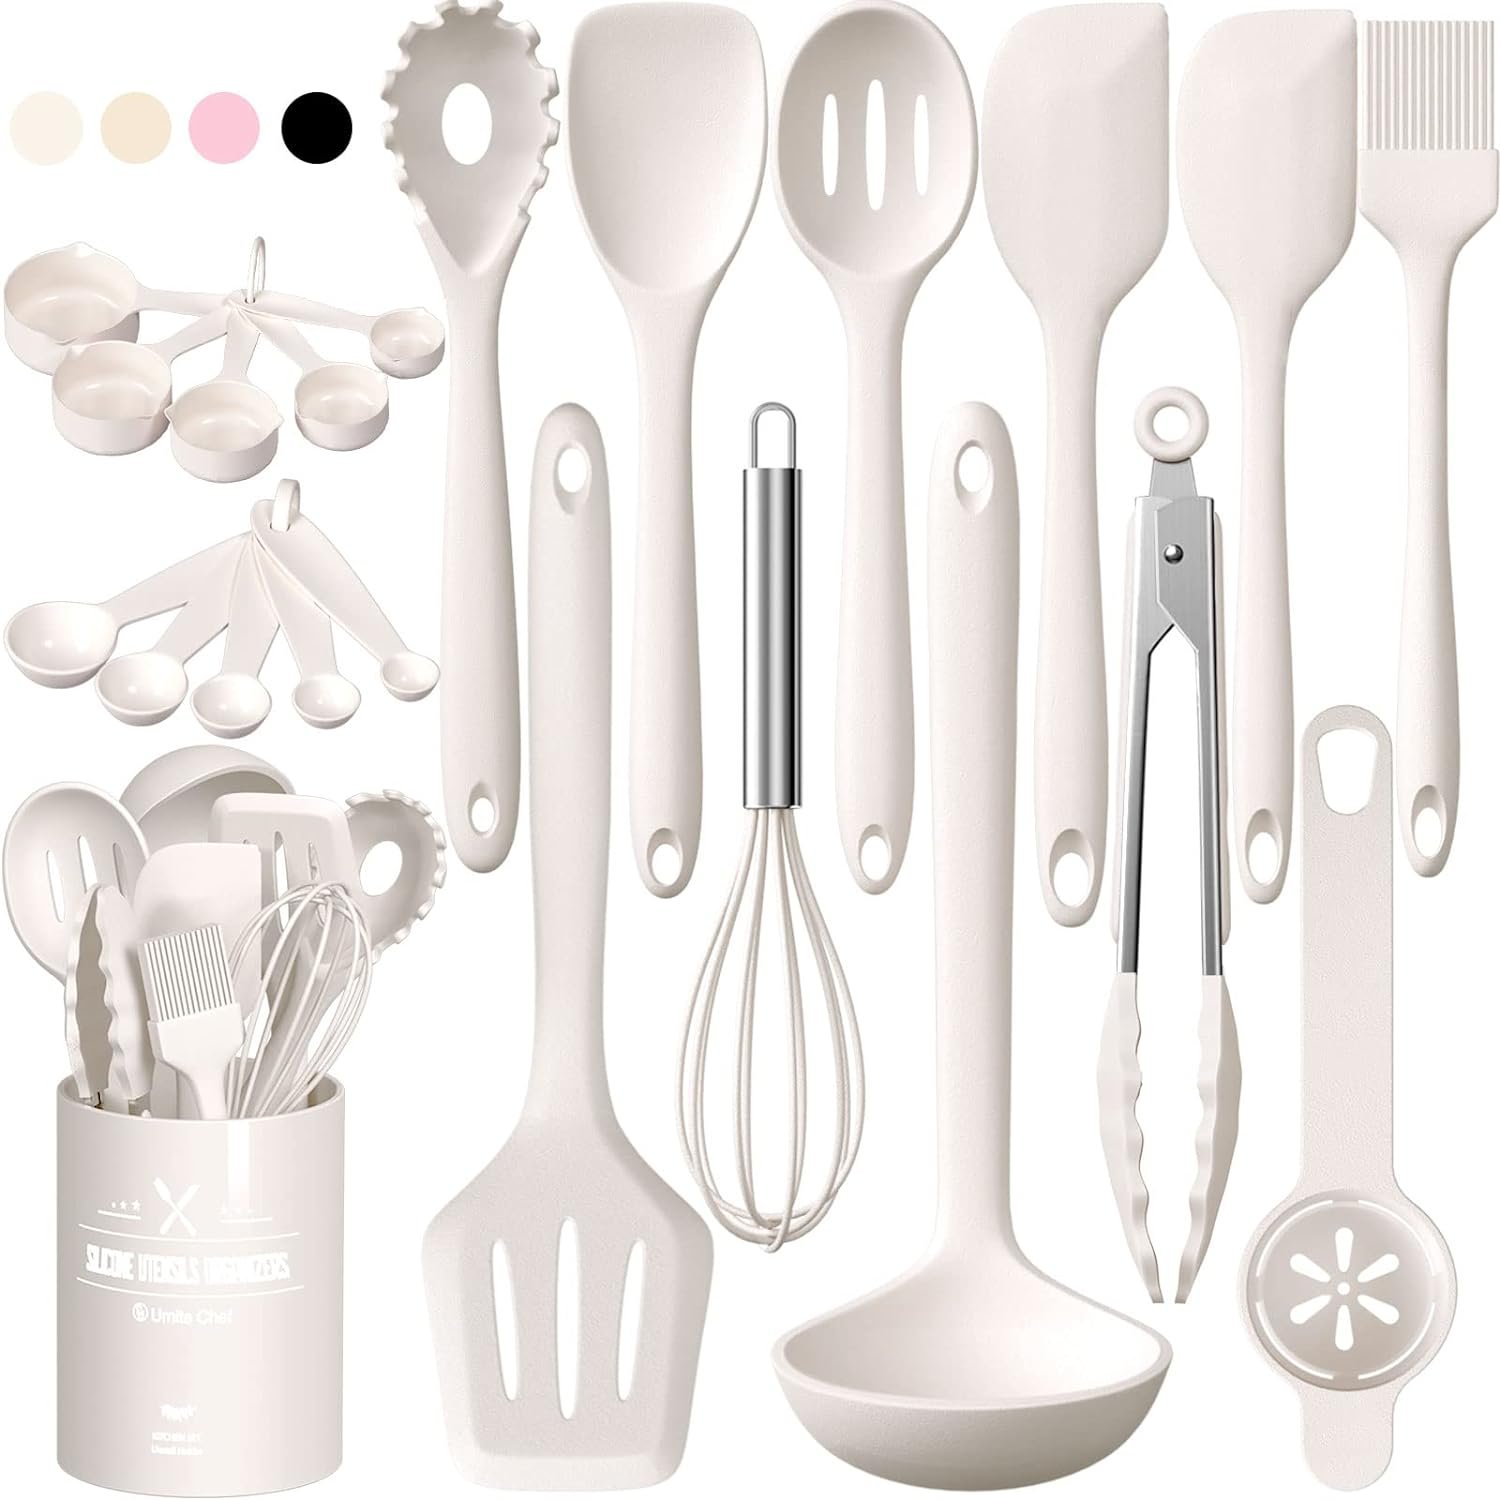 Kitchen Utensils Set, Umite Chef 22Pcs Silicone Cooking Utensils Set, Heat Resistant Silicone Kitchen Spatulas Set with Holder, White Cooking Gadgets Tools Set for Nonstick Cookware, Dishwasher Safe